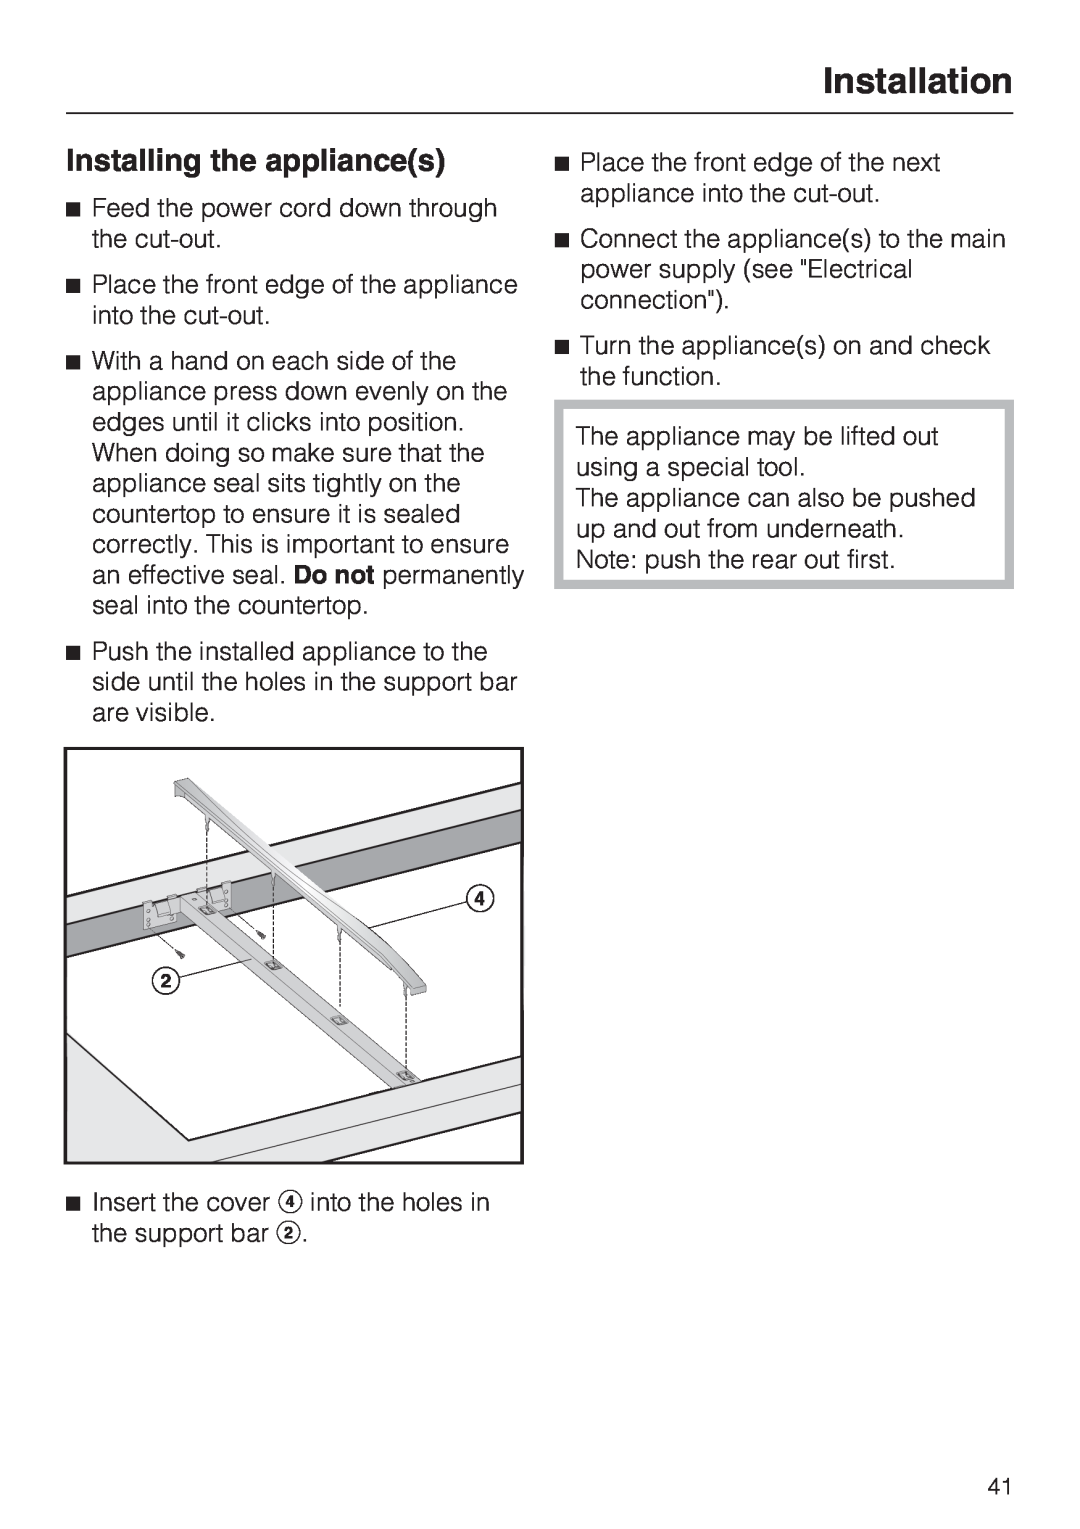 Miele CS 1221 installation instructions Installing the appliances, Installation 